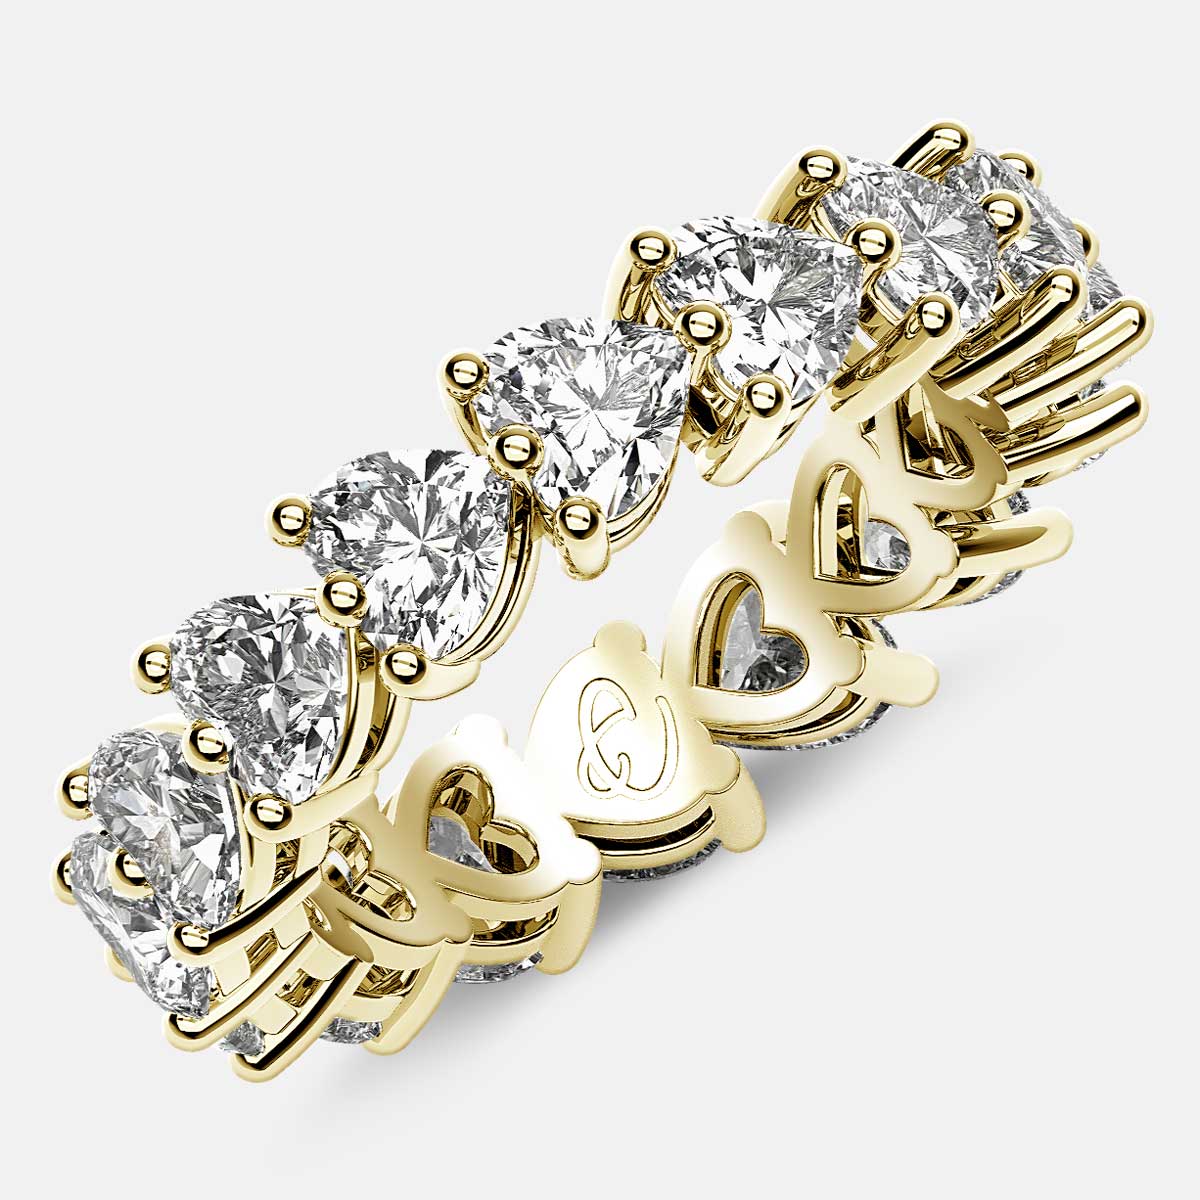 Eternity Ring with Prong Set Heart Shaped Diamonds in 18k Yellow Gold